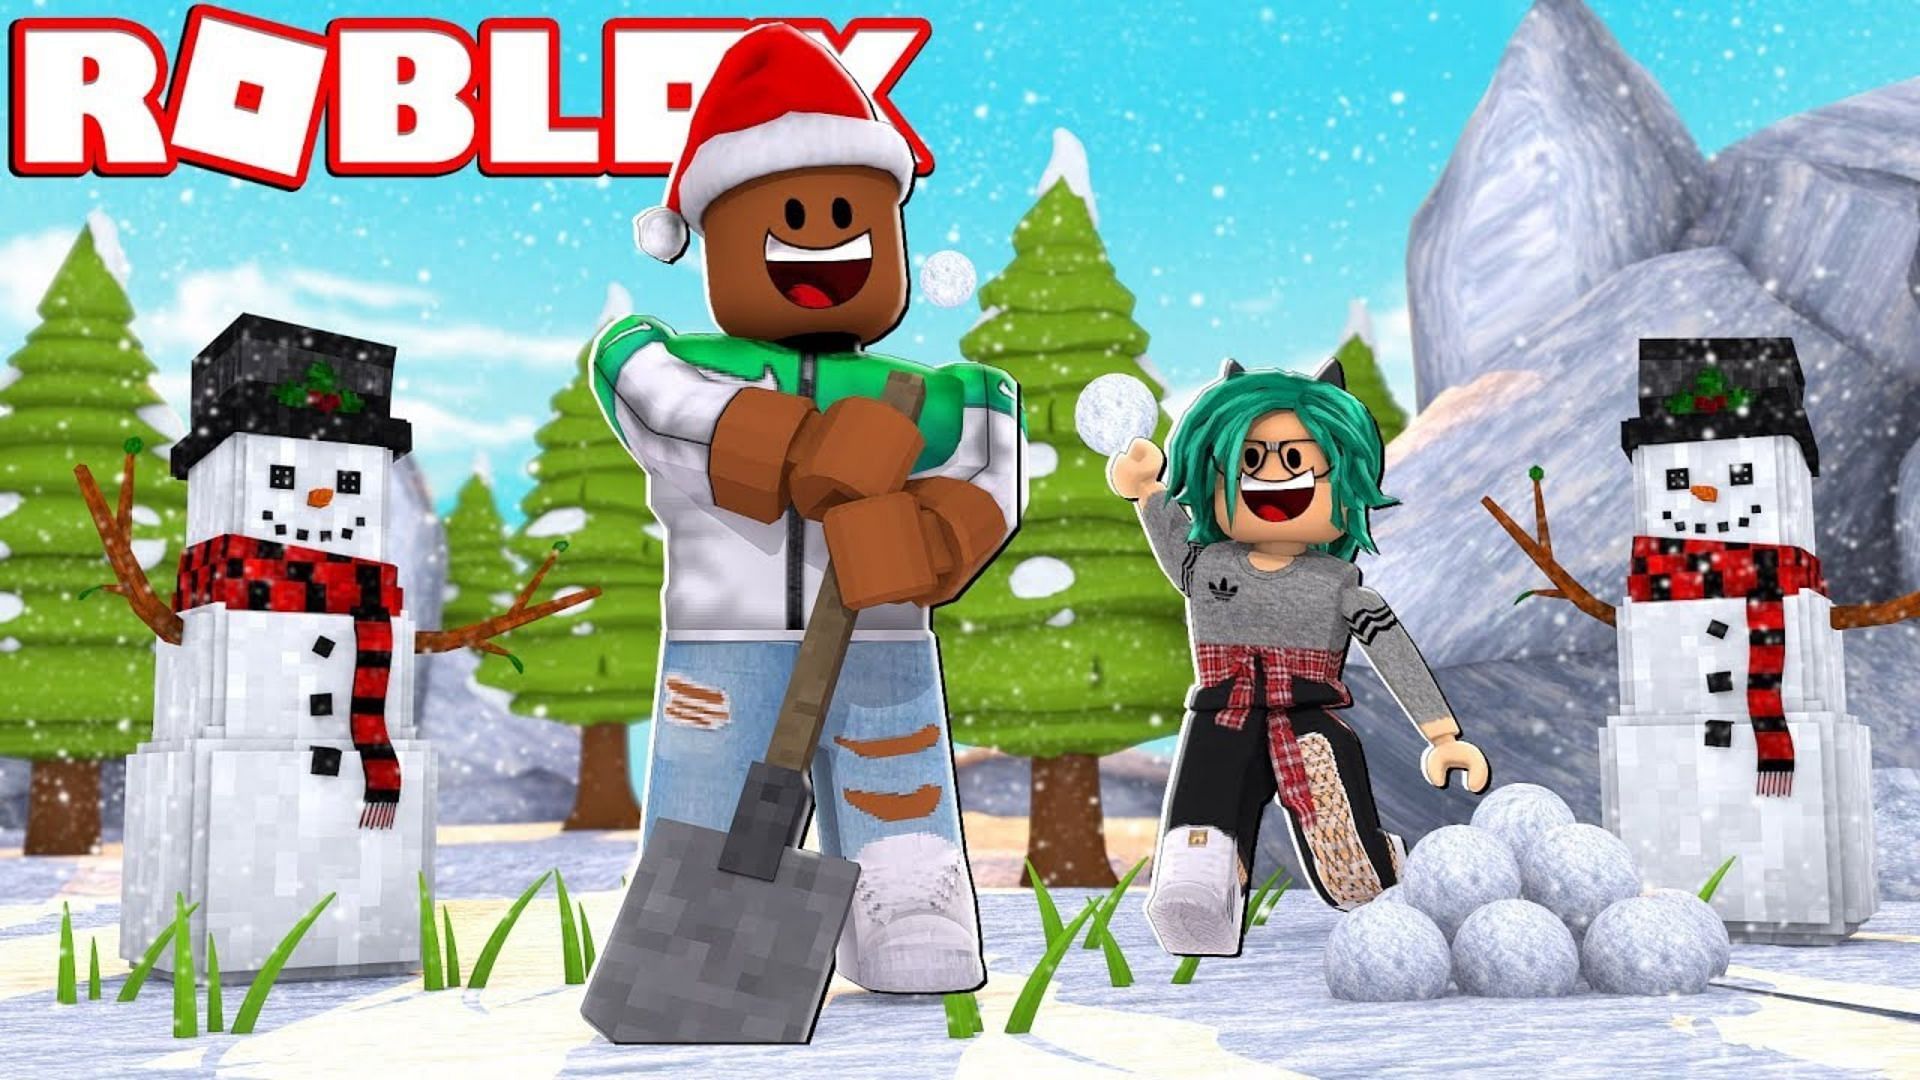 Roblox Snow Shoveling Simulator codes for free gems, pets, and coins (Image via GamingWithKev, YouTube)